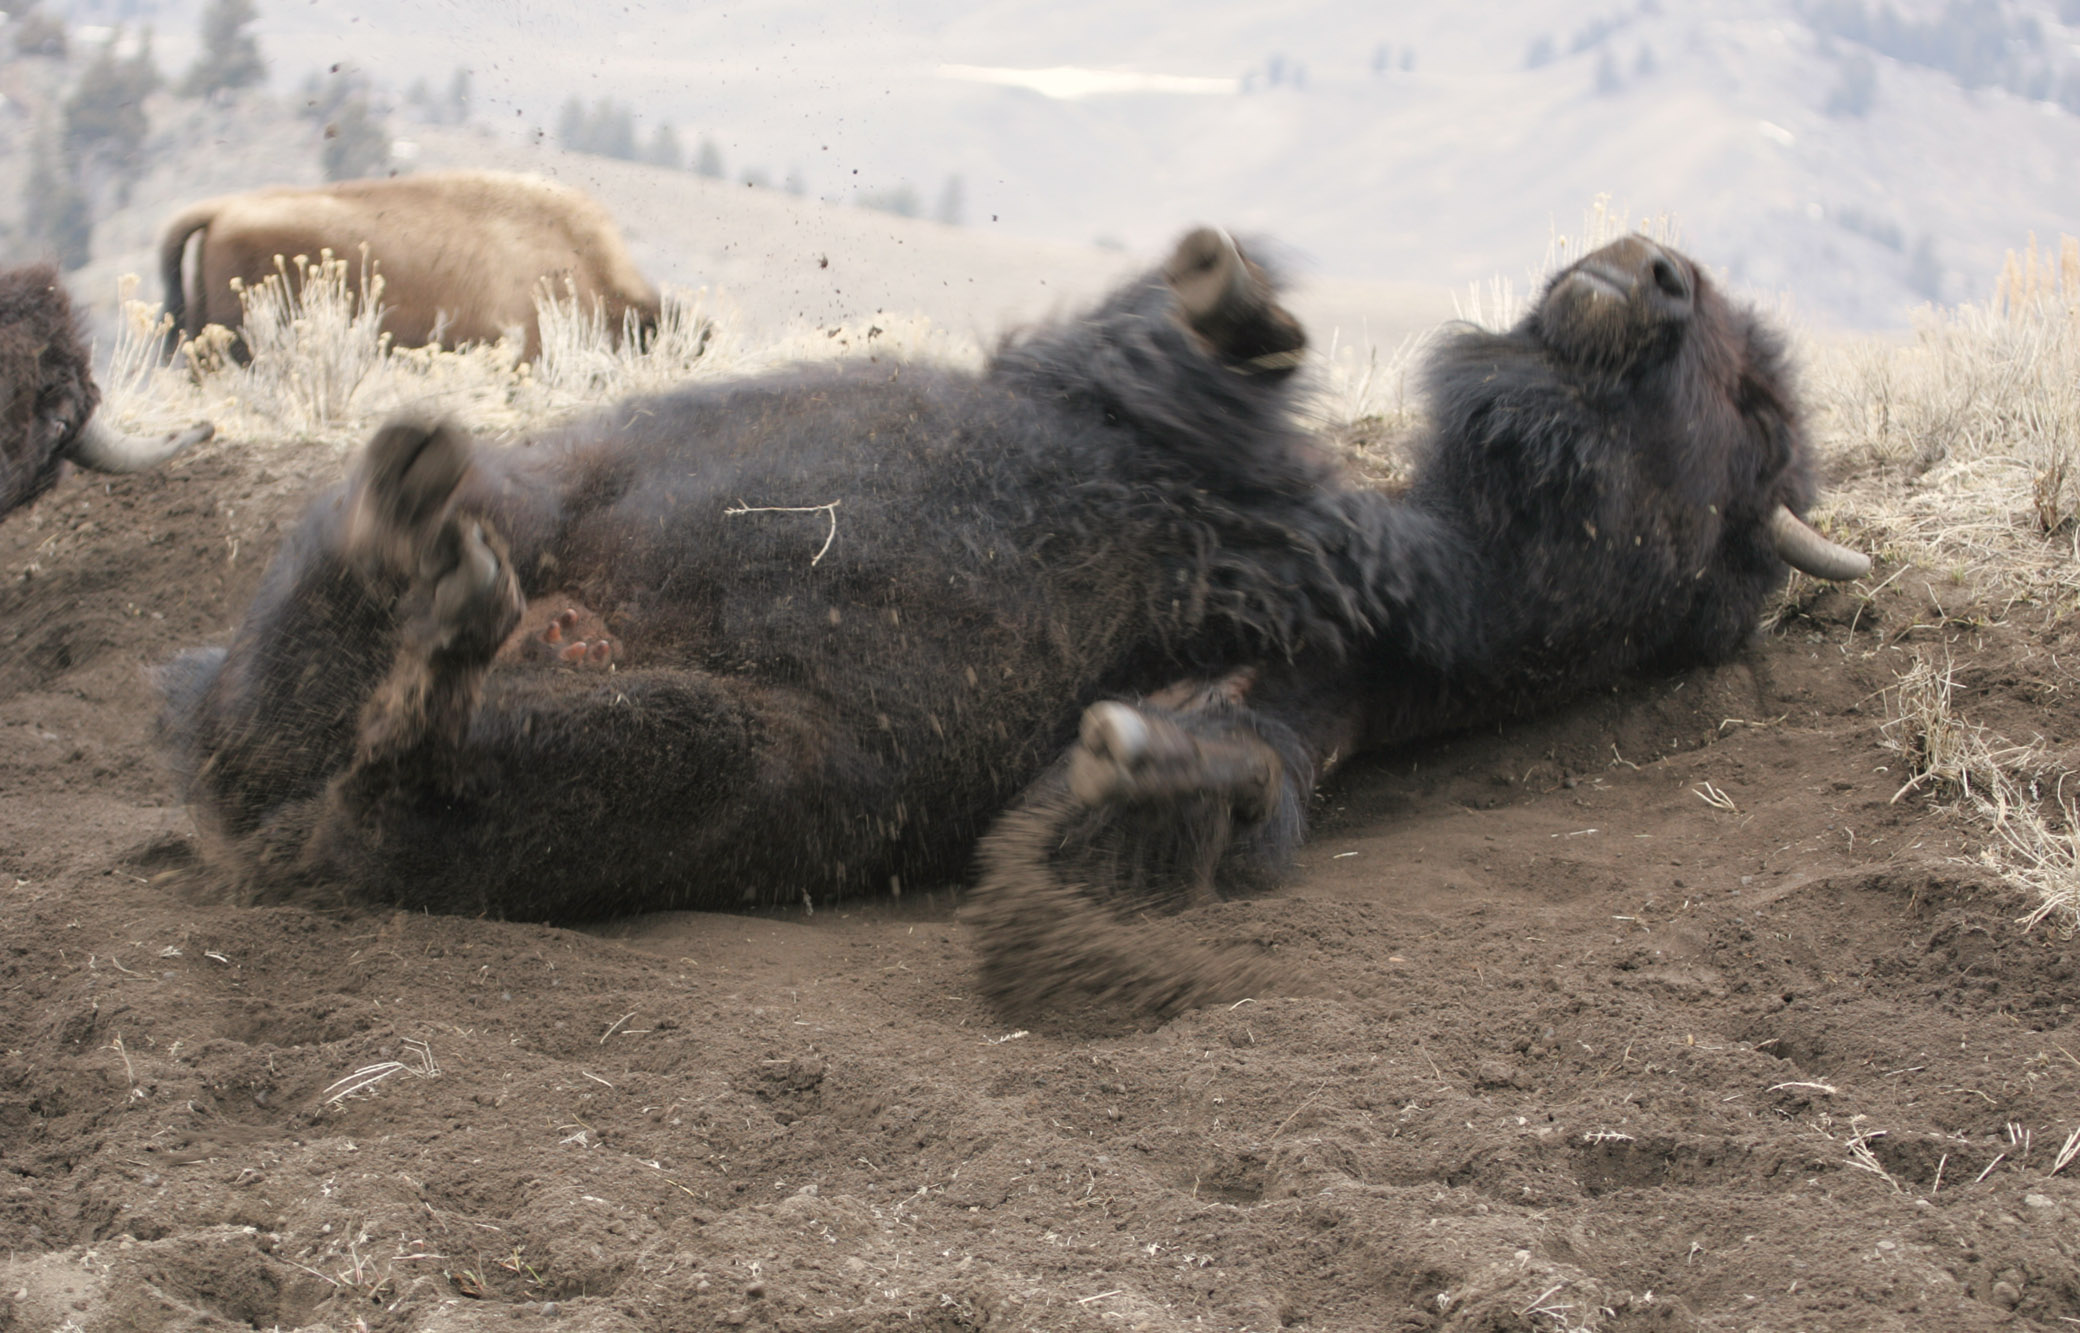 A bison rolls in the dirt.